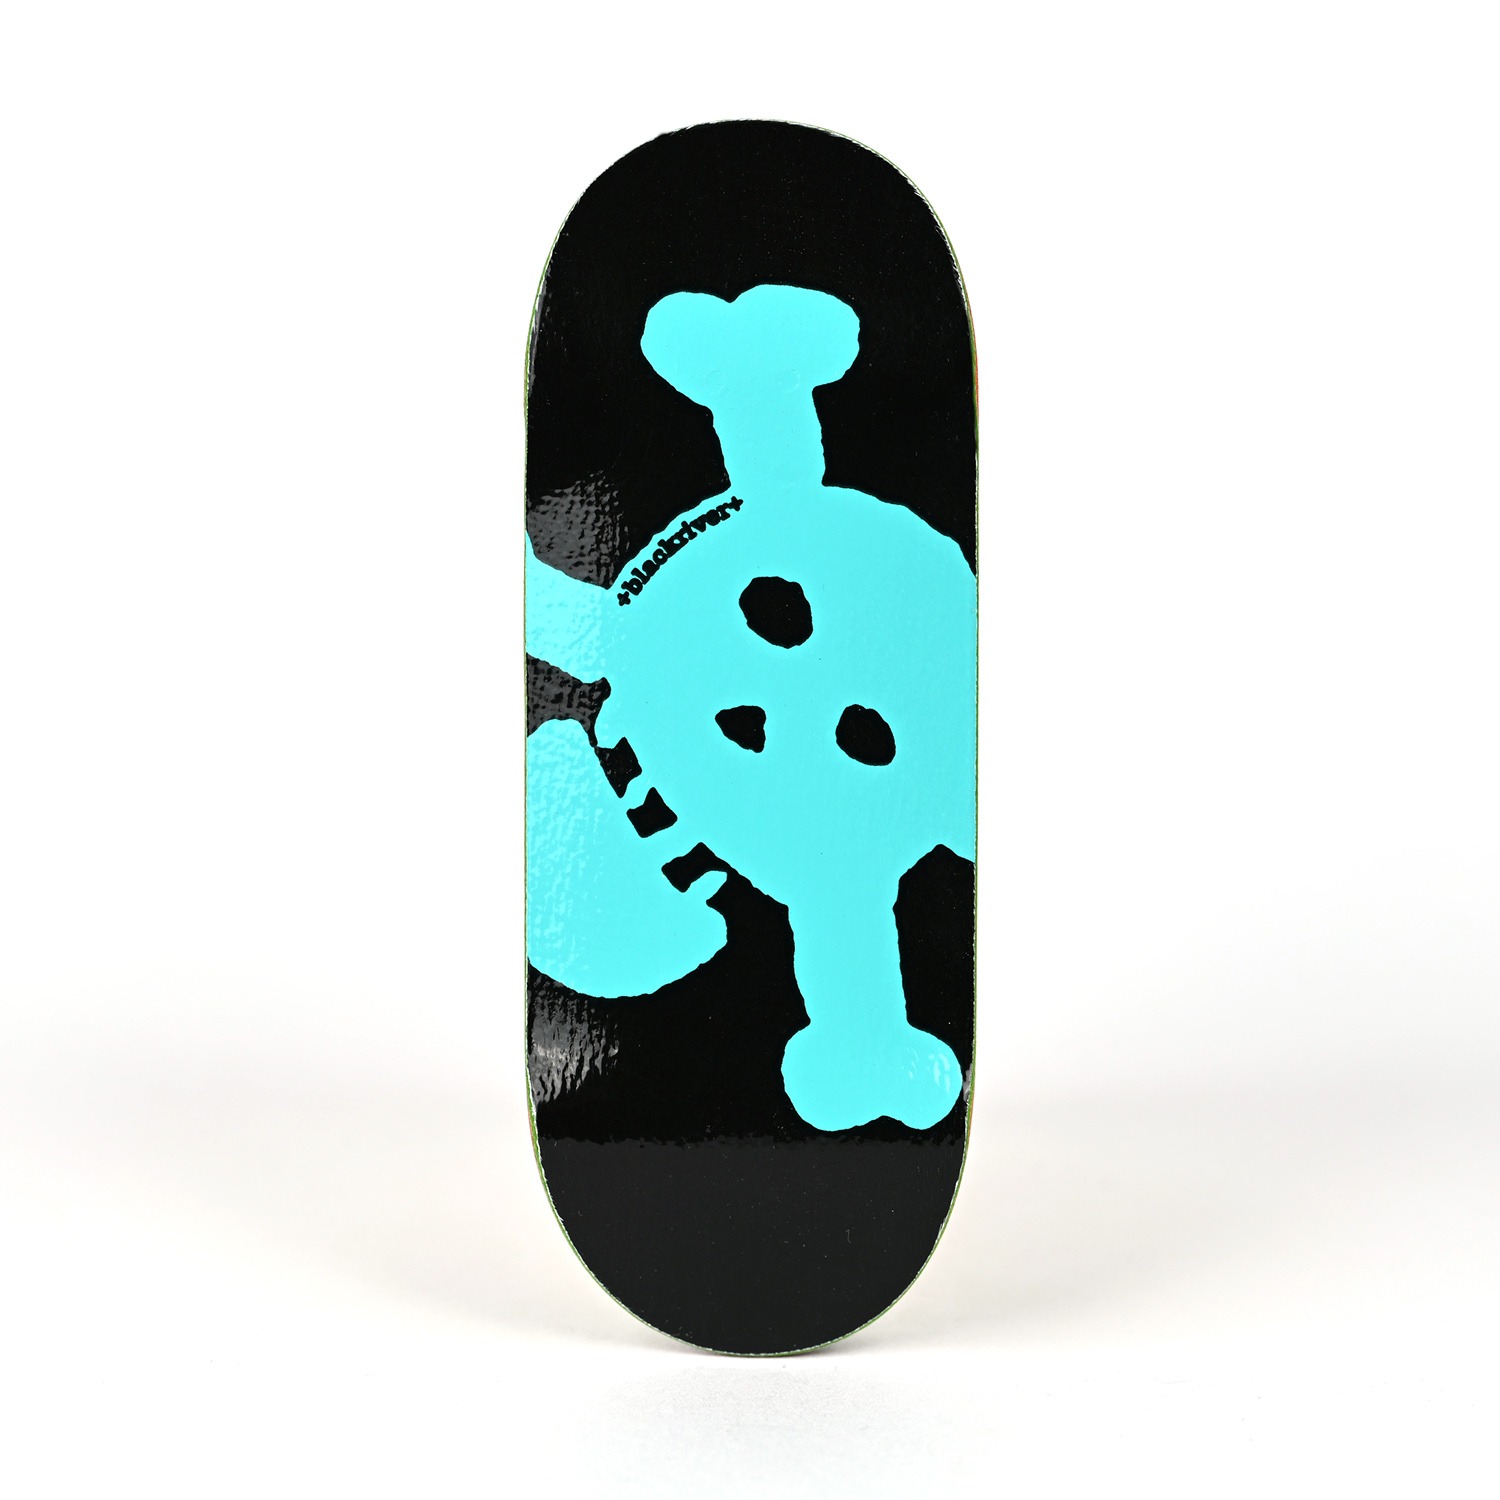 BLACKRIVER - New Skull Turquoise (32/33.3/36mm) X-Wide 5-ply Fingerboard Deck